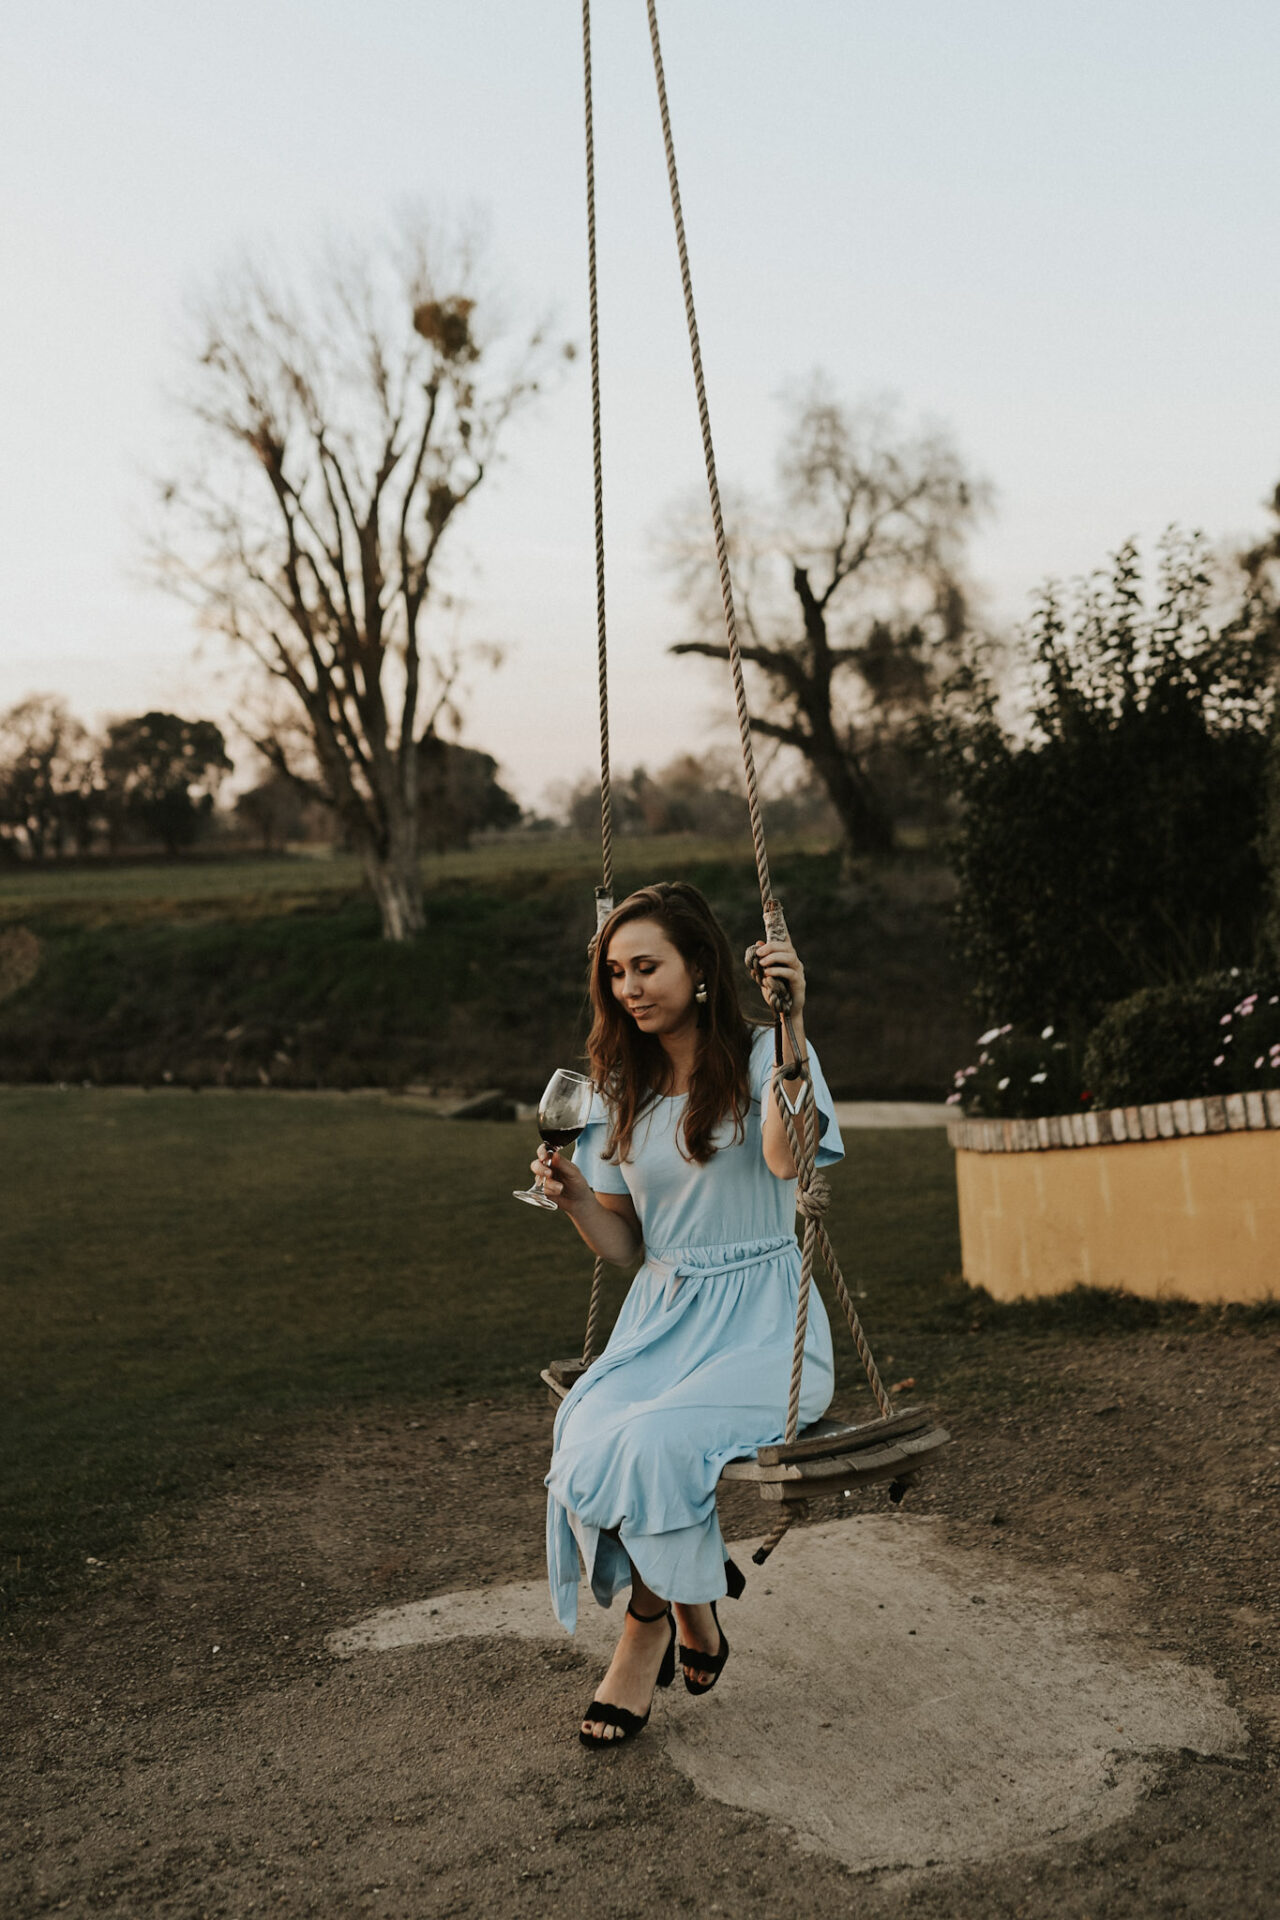 girl on a swing at a winery, practicing wine tasting etiquette